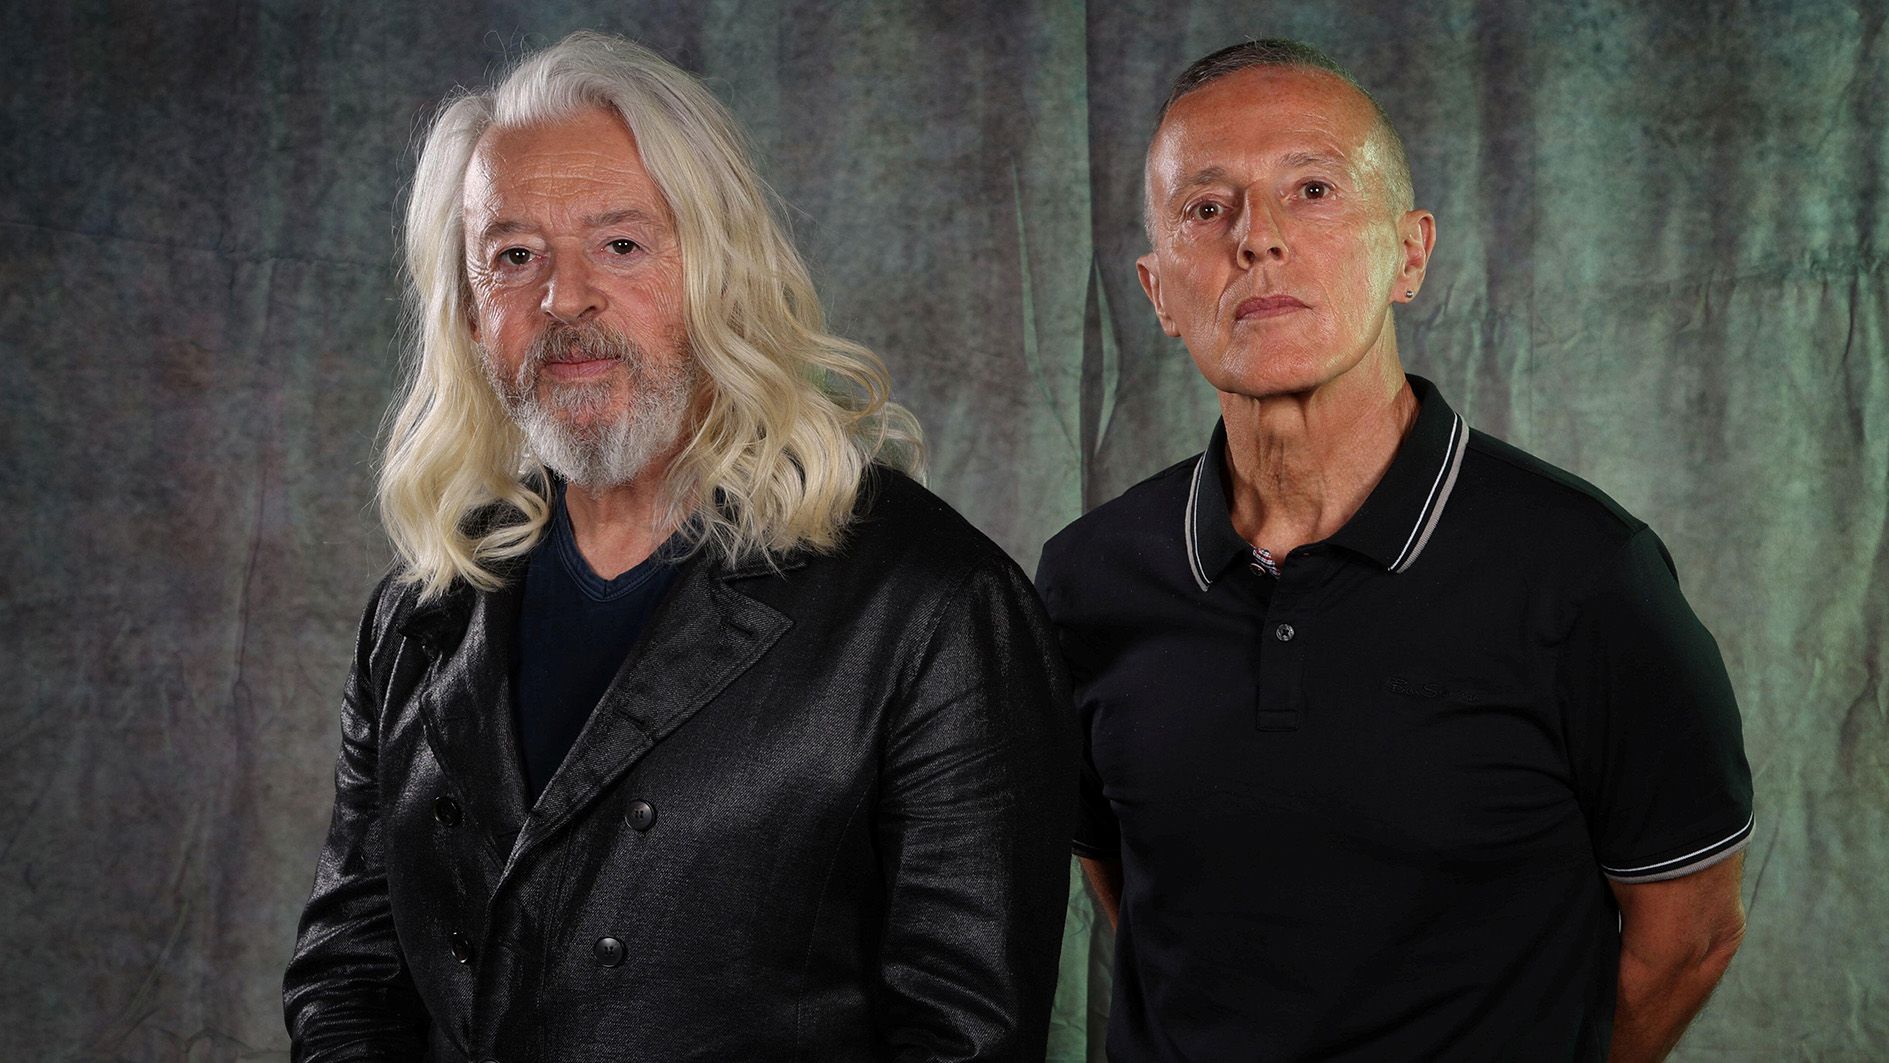 Tears For Fears, back with first new album in 18 years, extend a